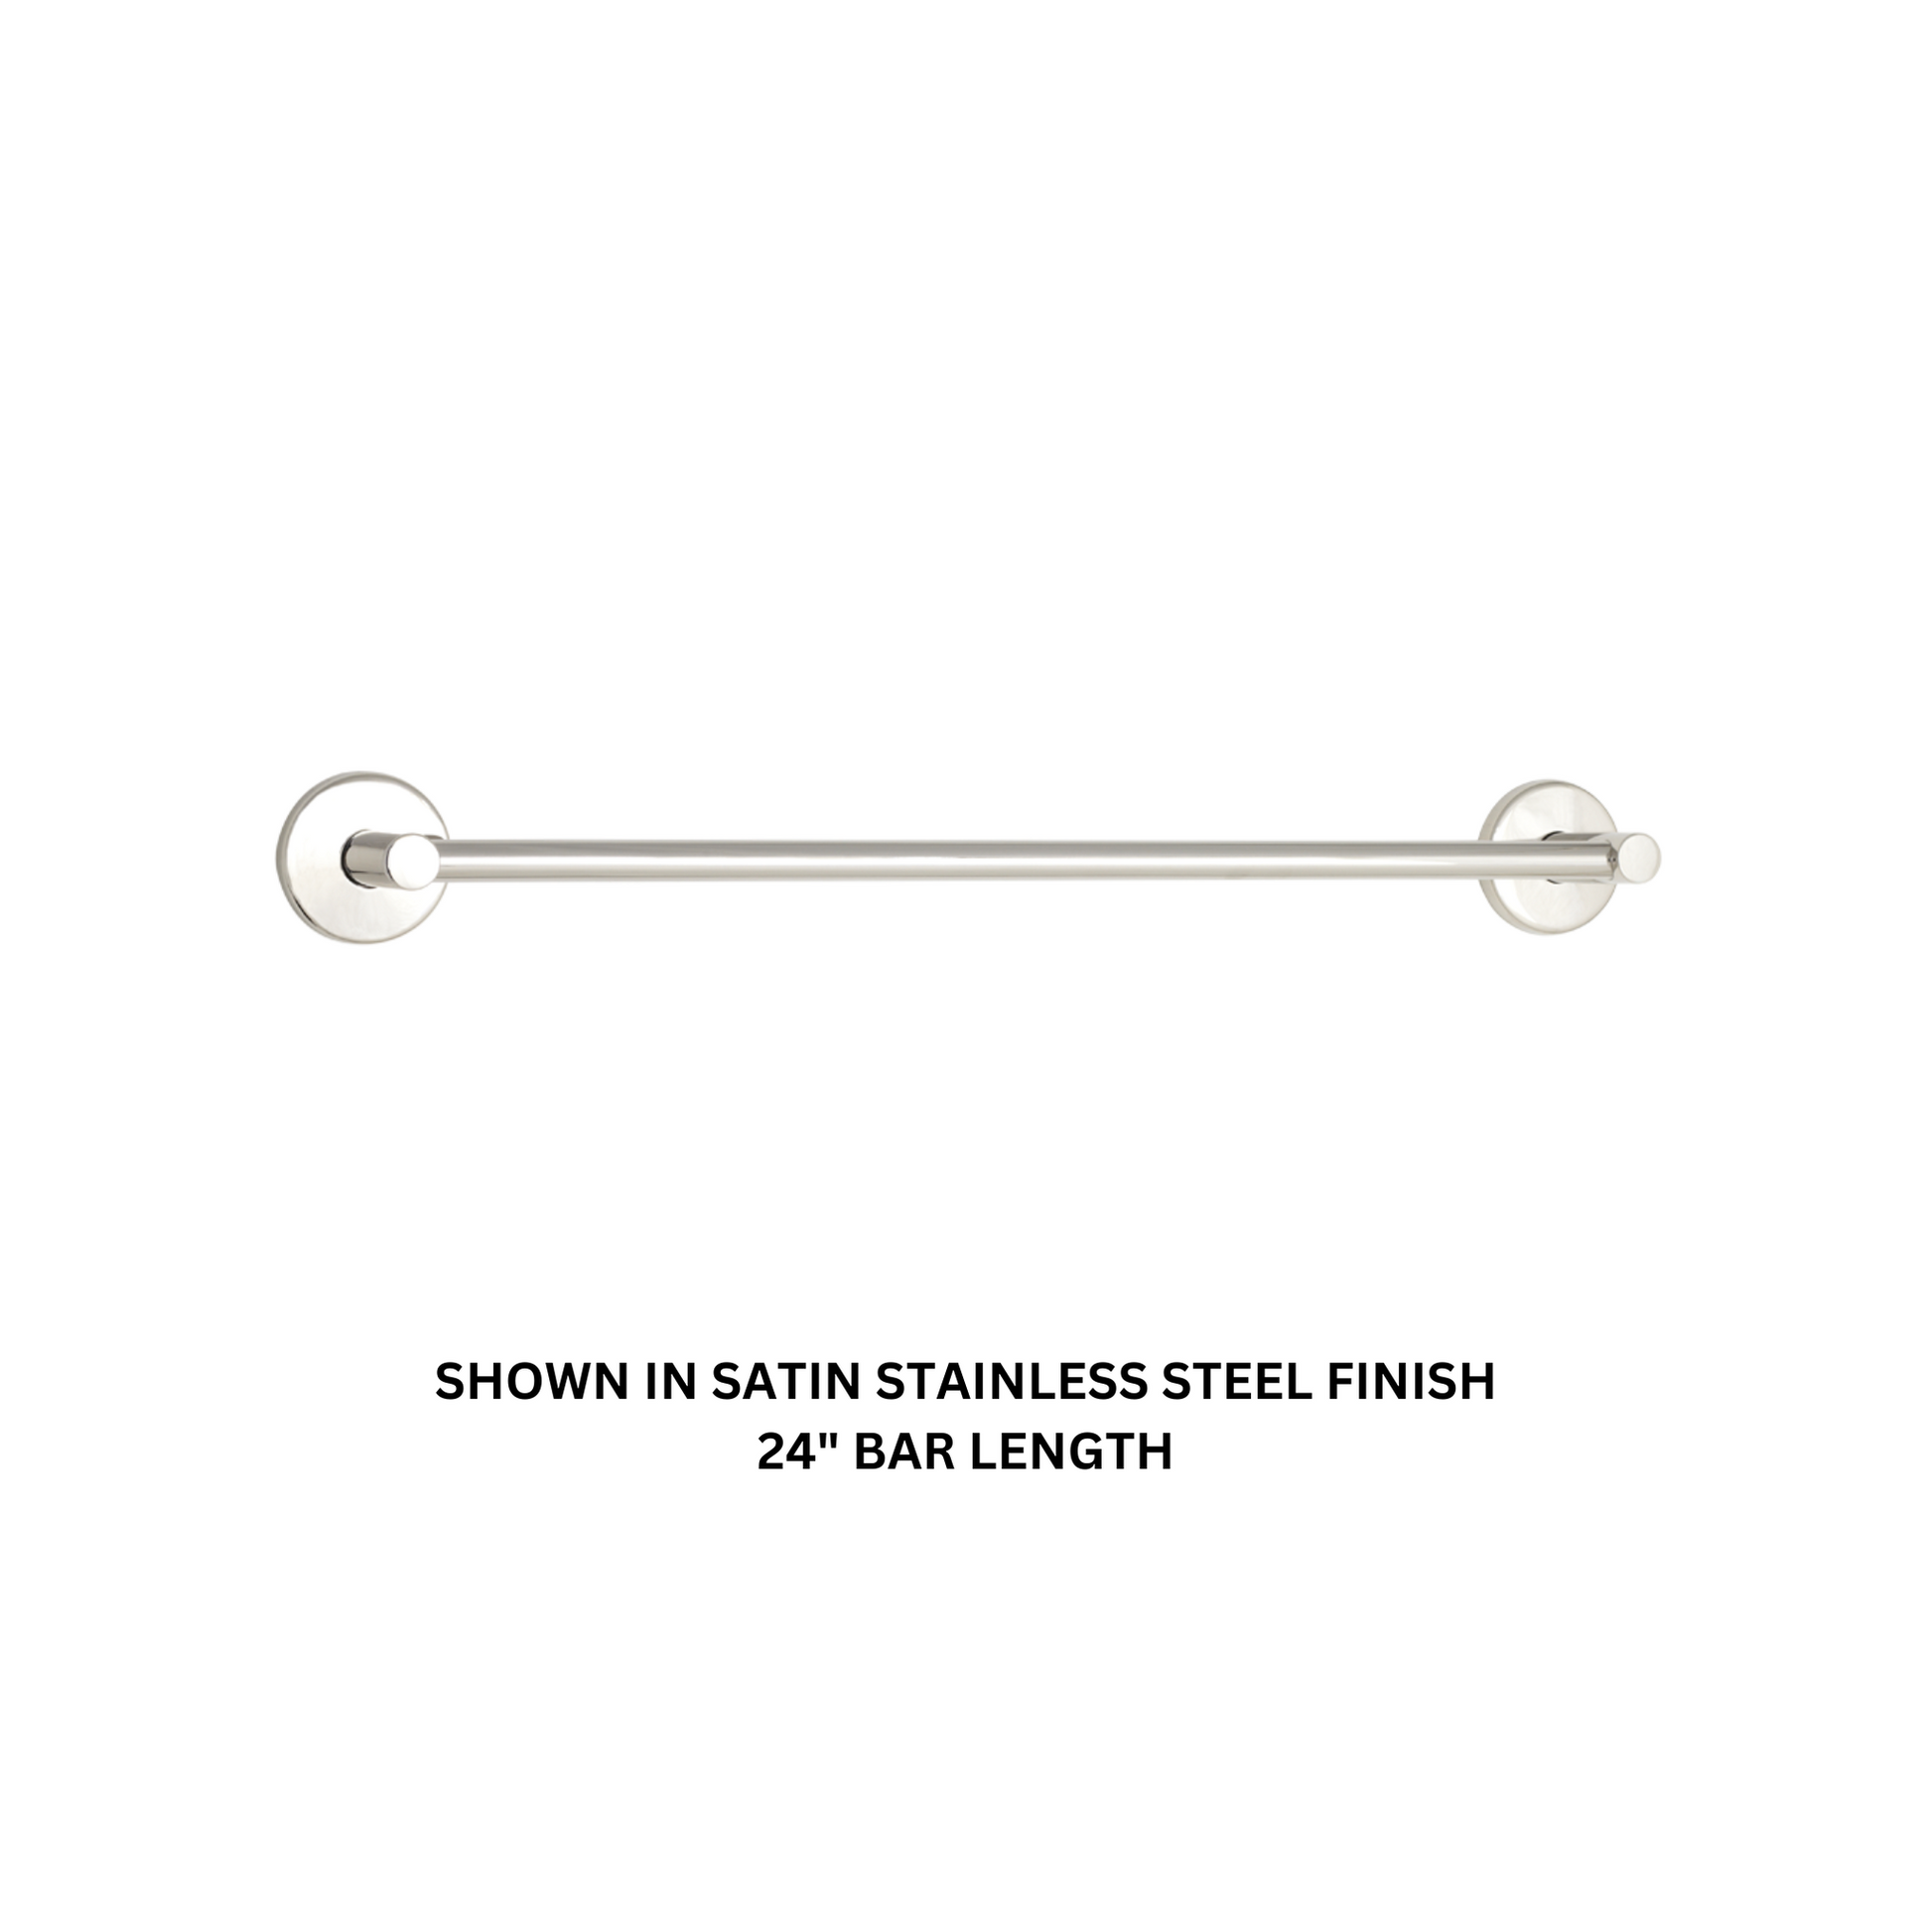 Seachrome Conorado Series 30" Polished Stainless Steel Concealed Mounting Flange Single Towel Bar